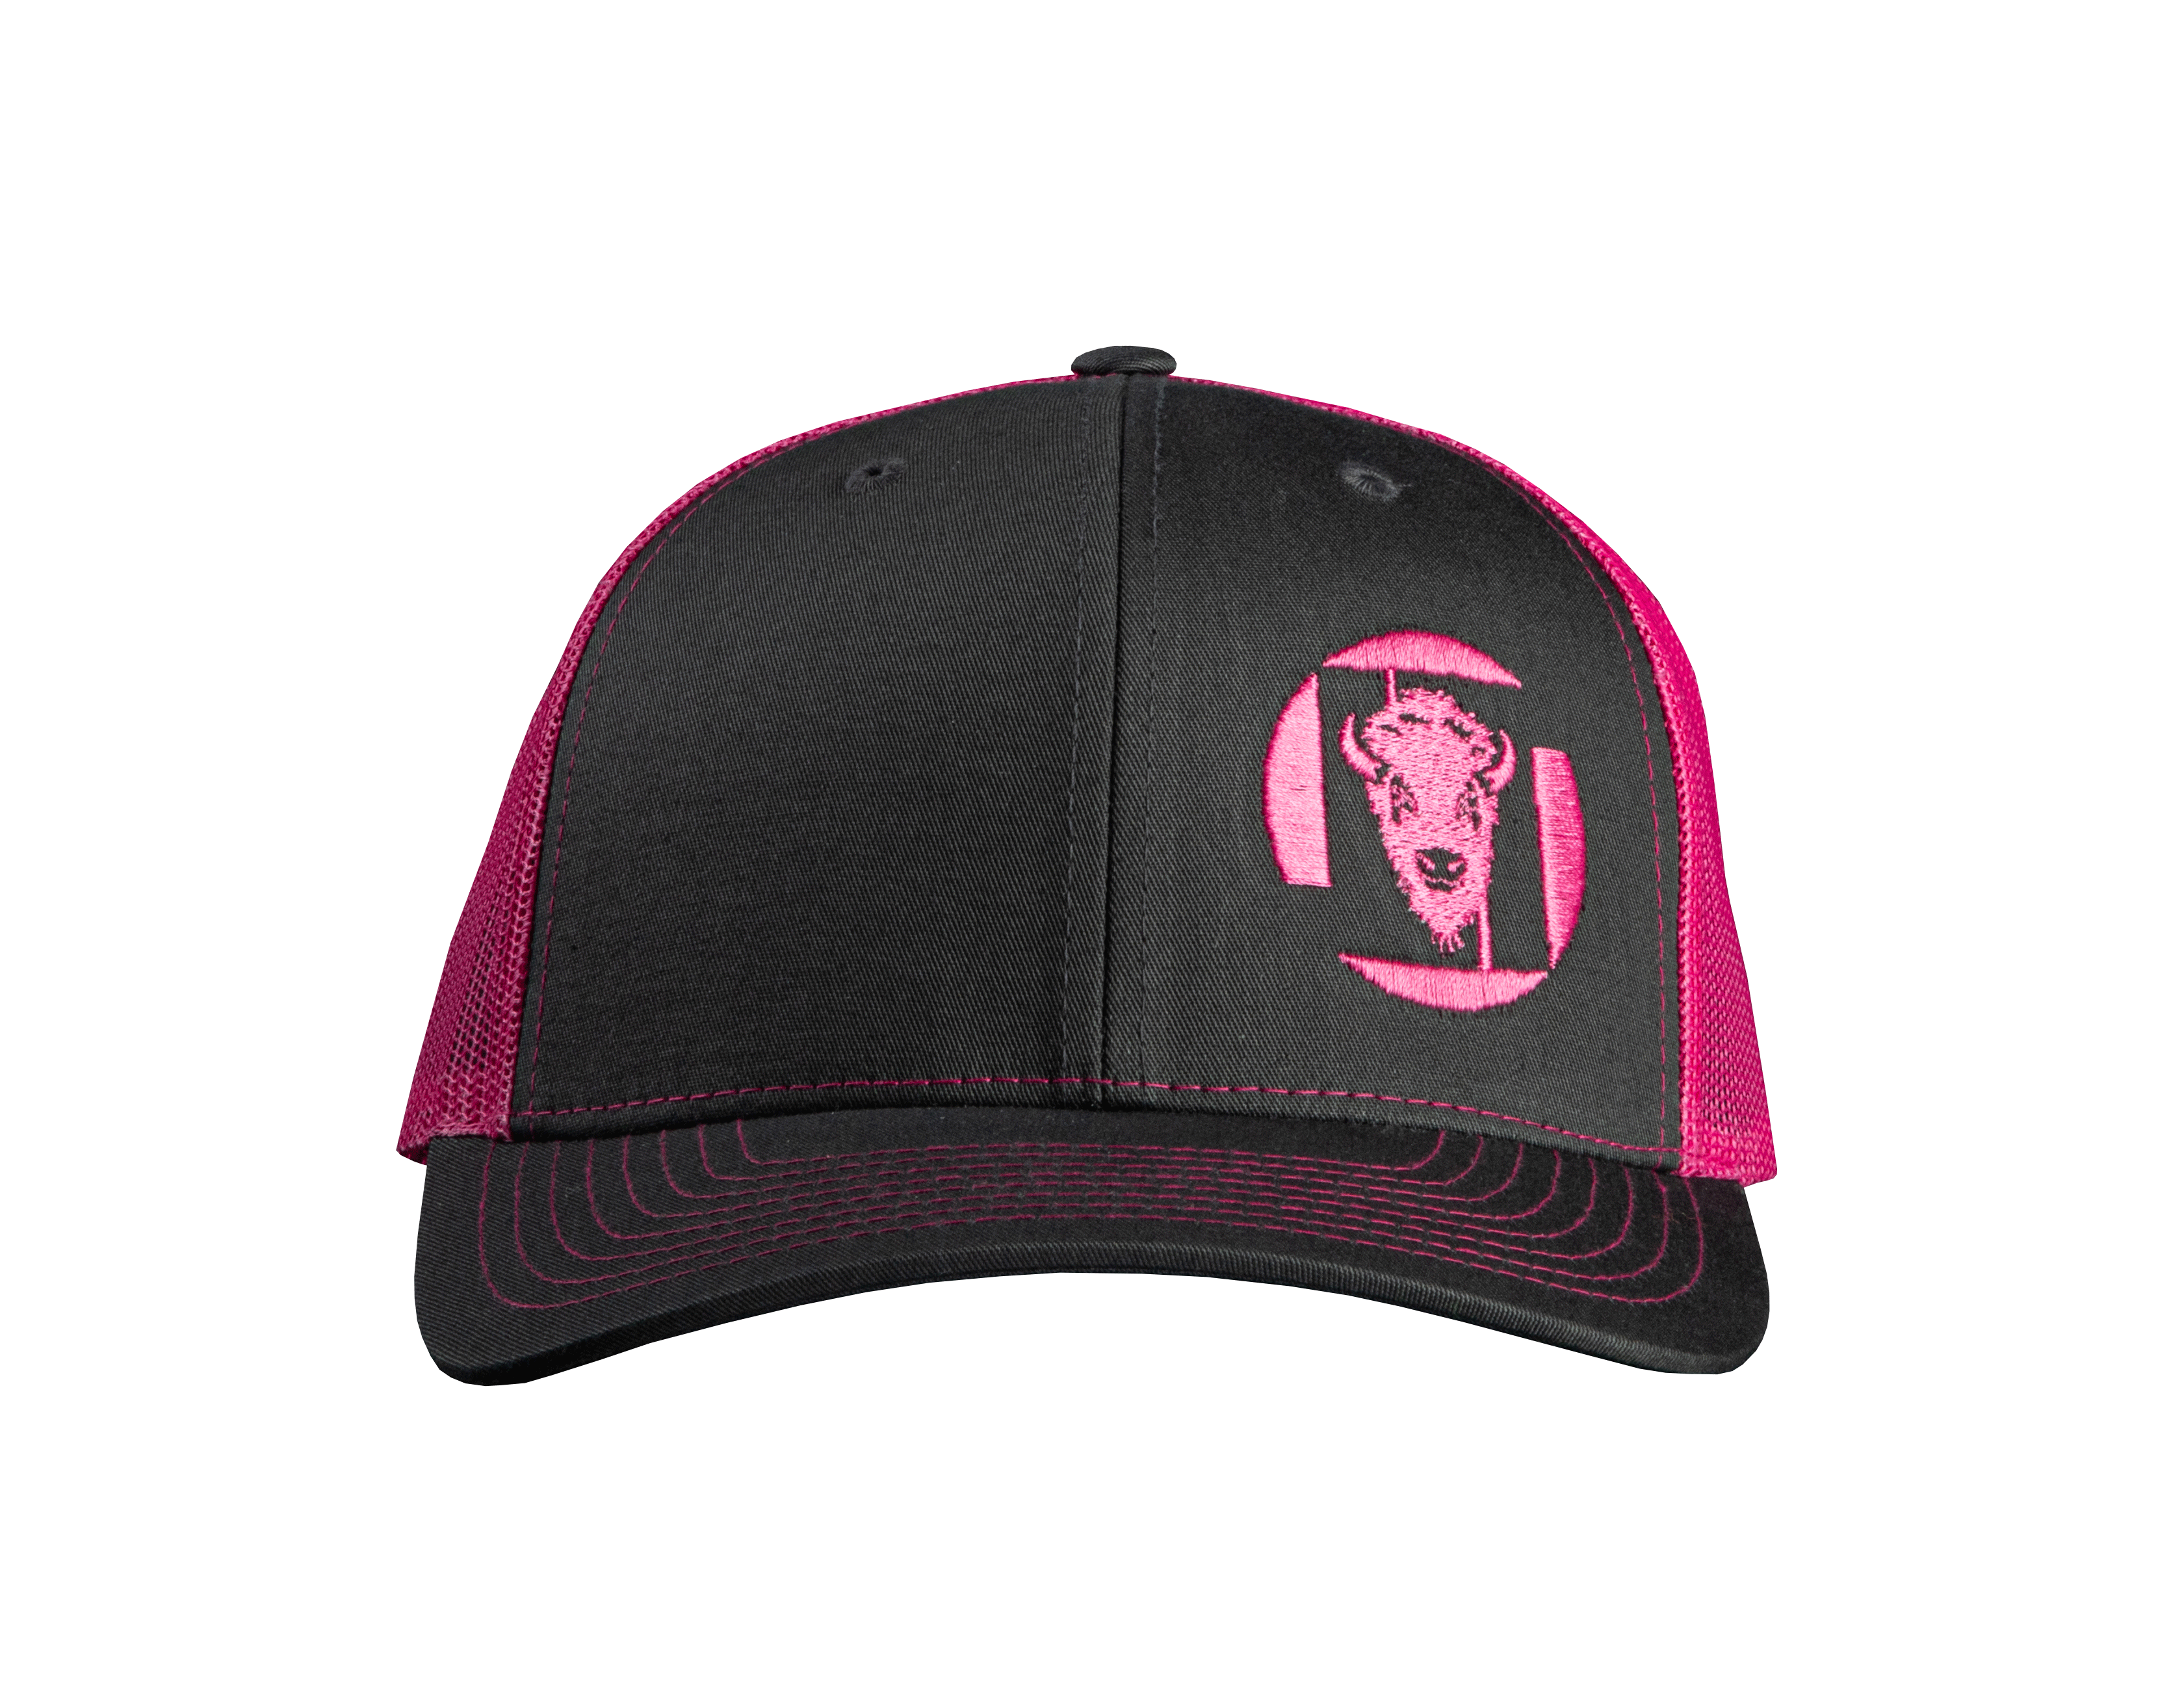 LT Logo Hat Charcoal Crown/Brim with Neon Pink Mesh Back & matching logo embroidery